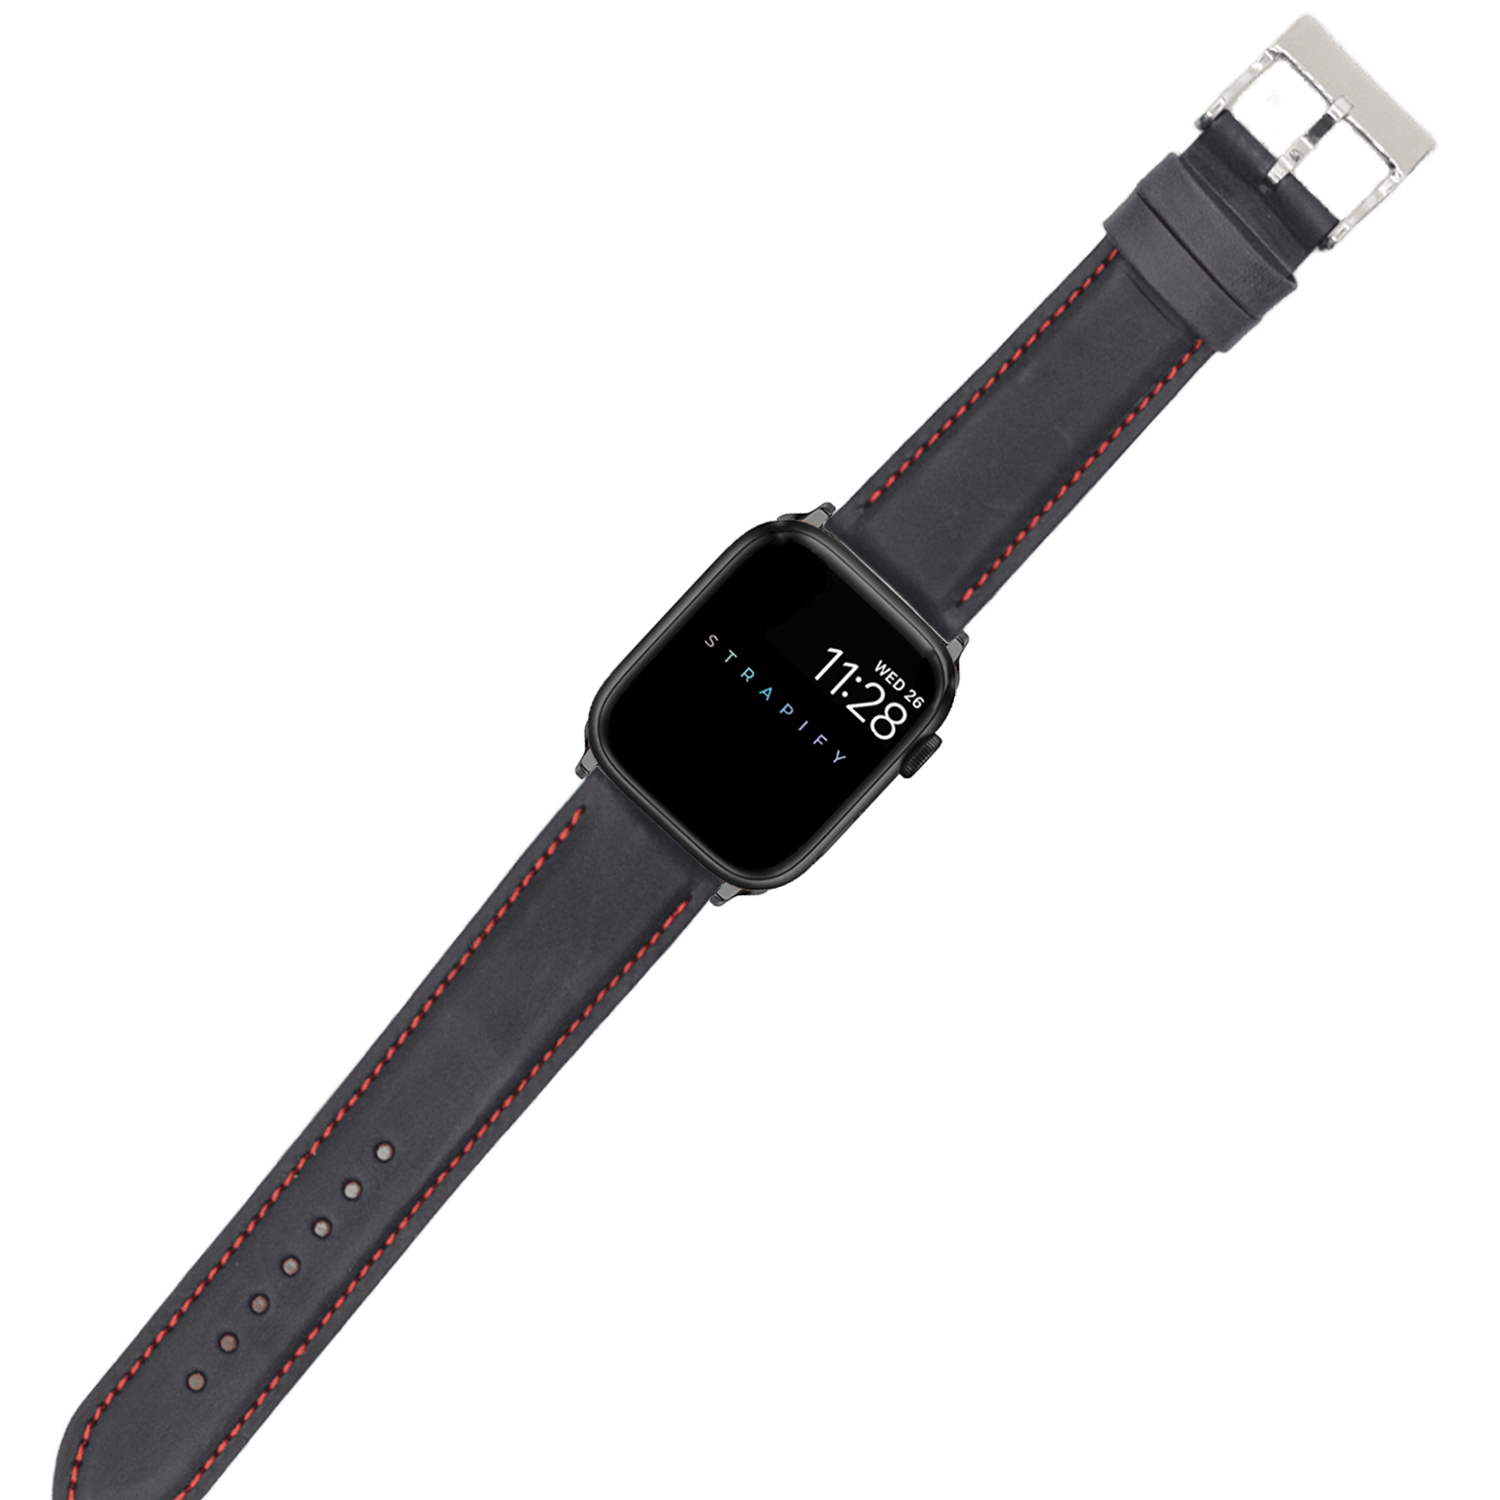 [Apple Watch] Padded Leather - Black | Red Stitching